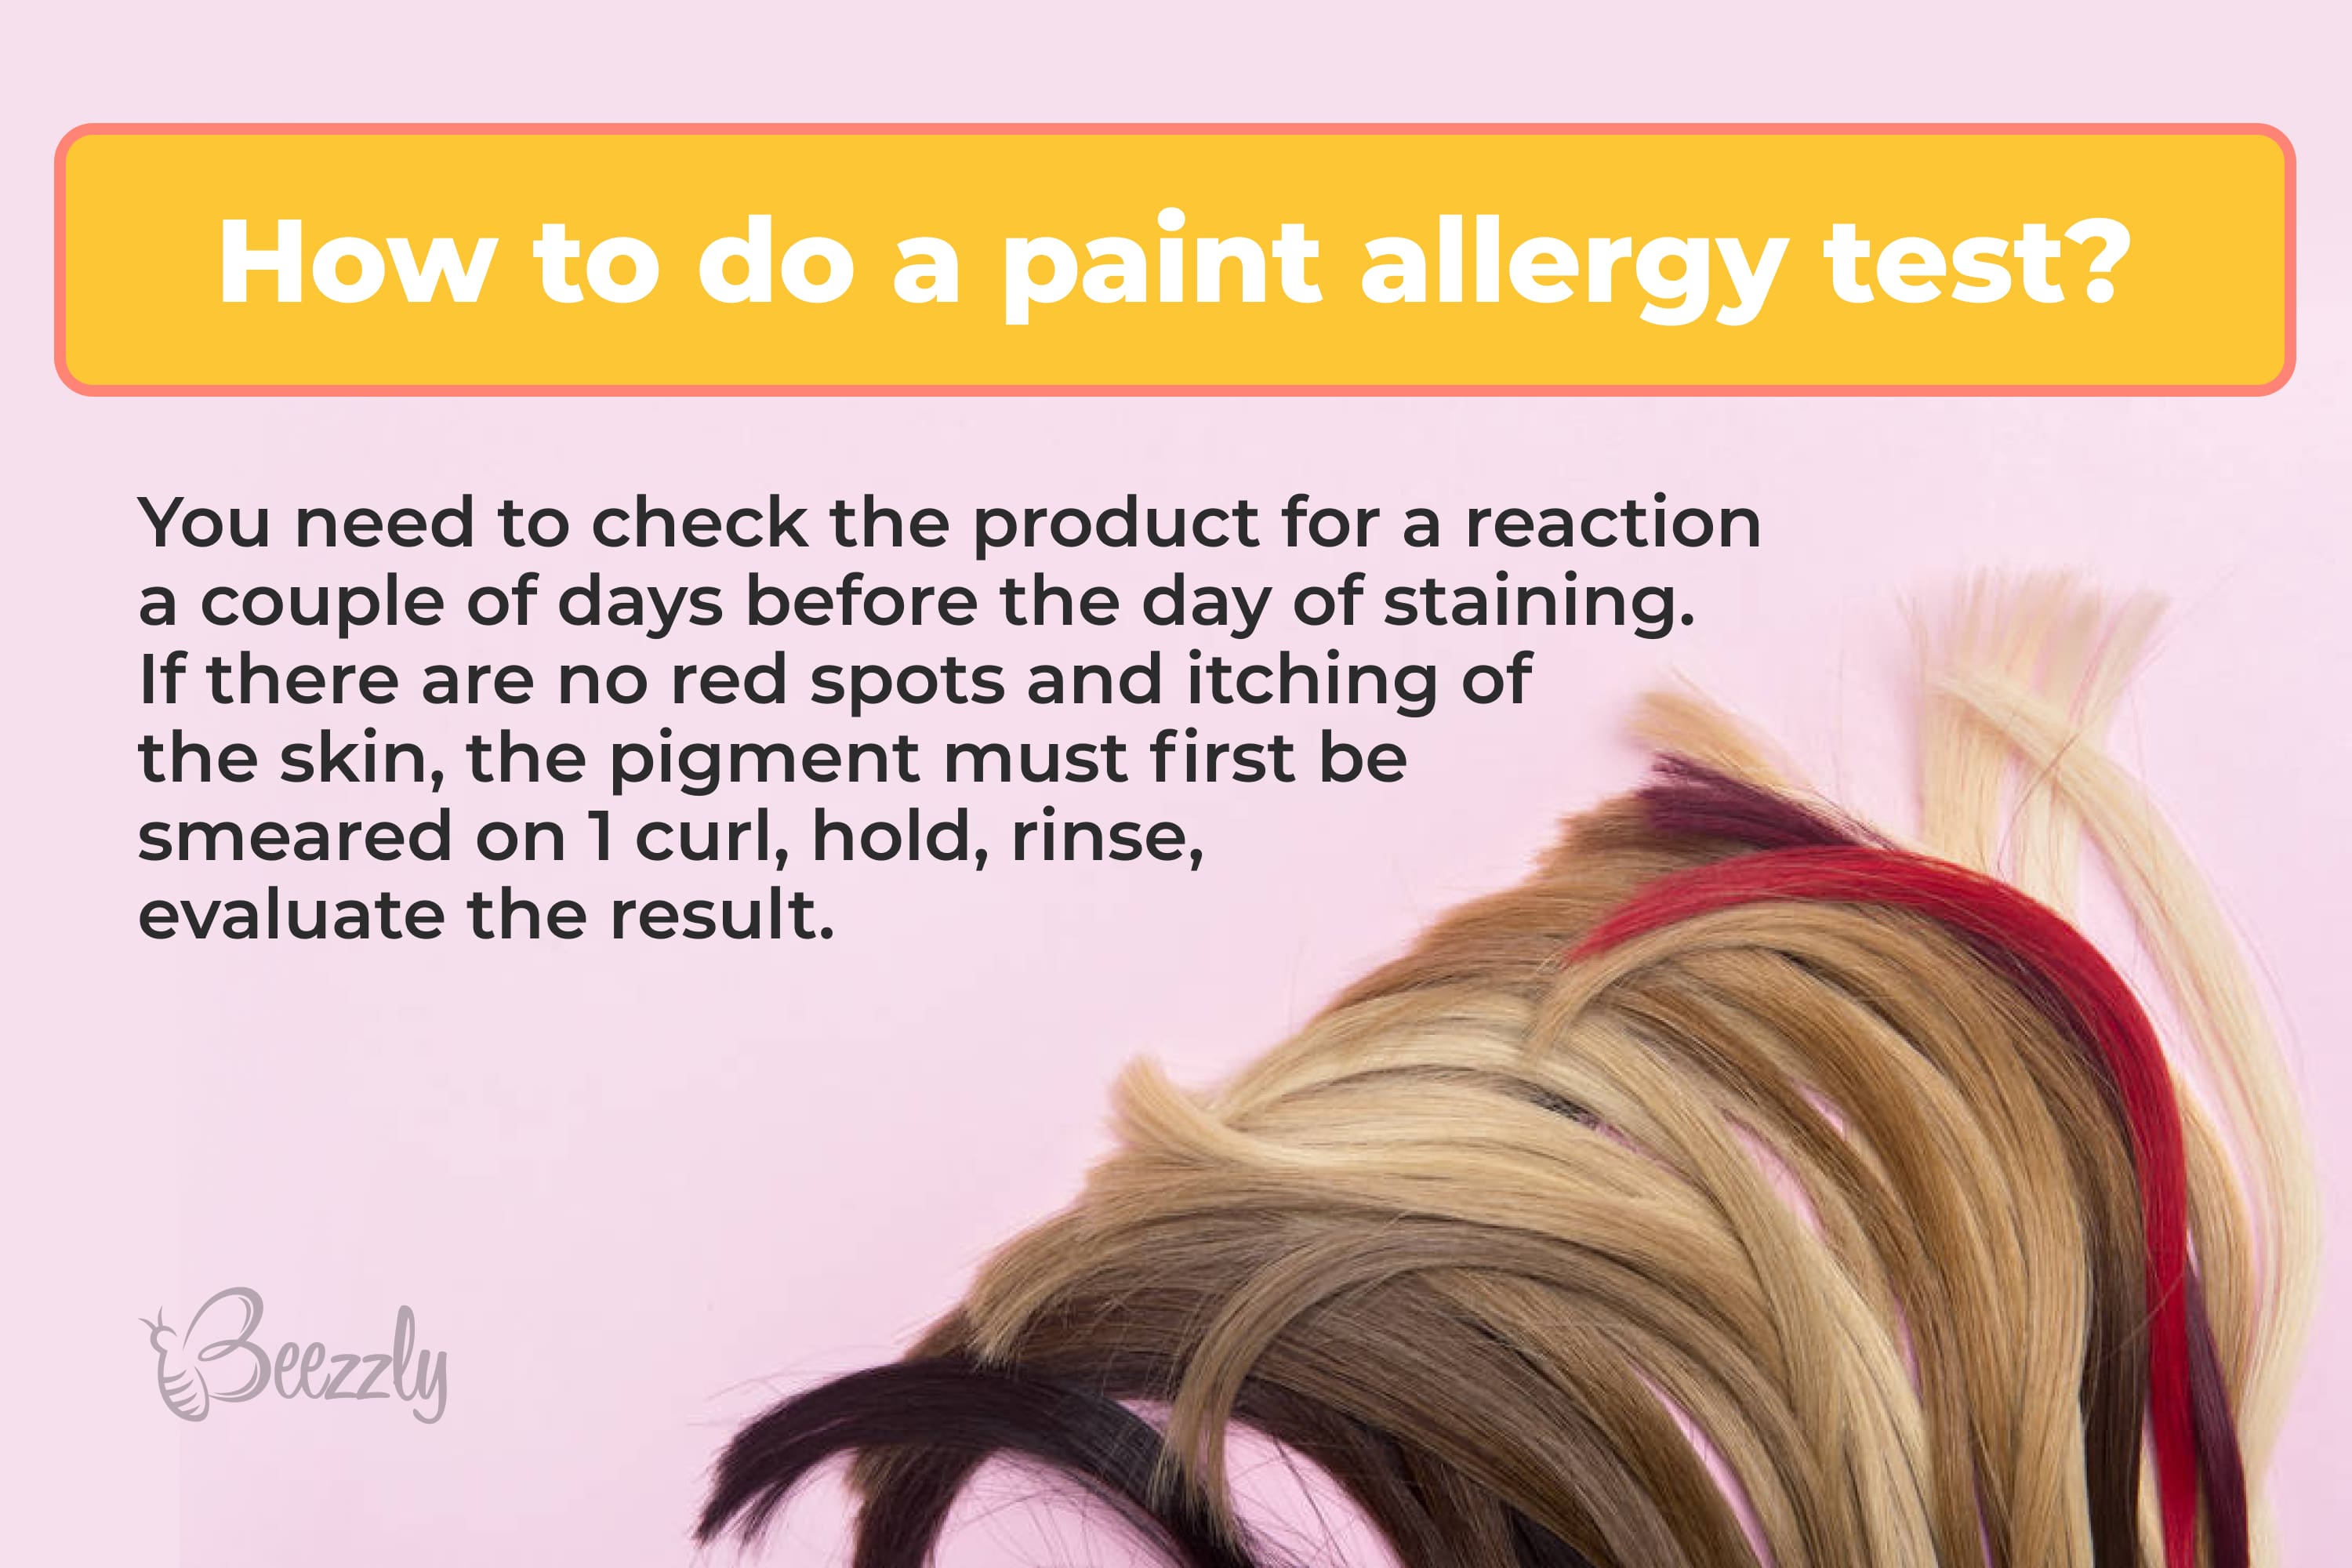 How to do a paint allergy test